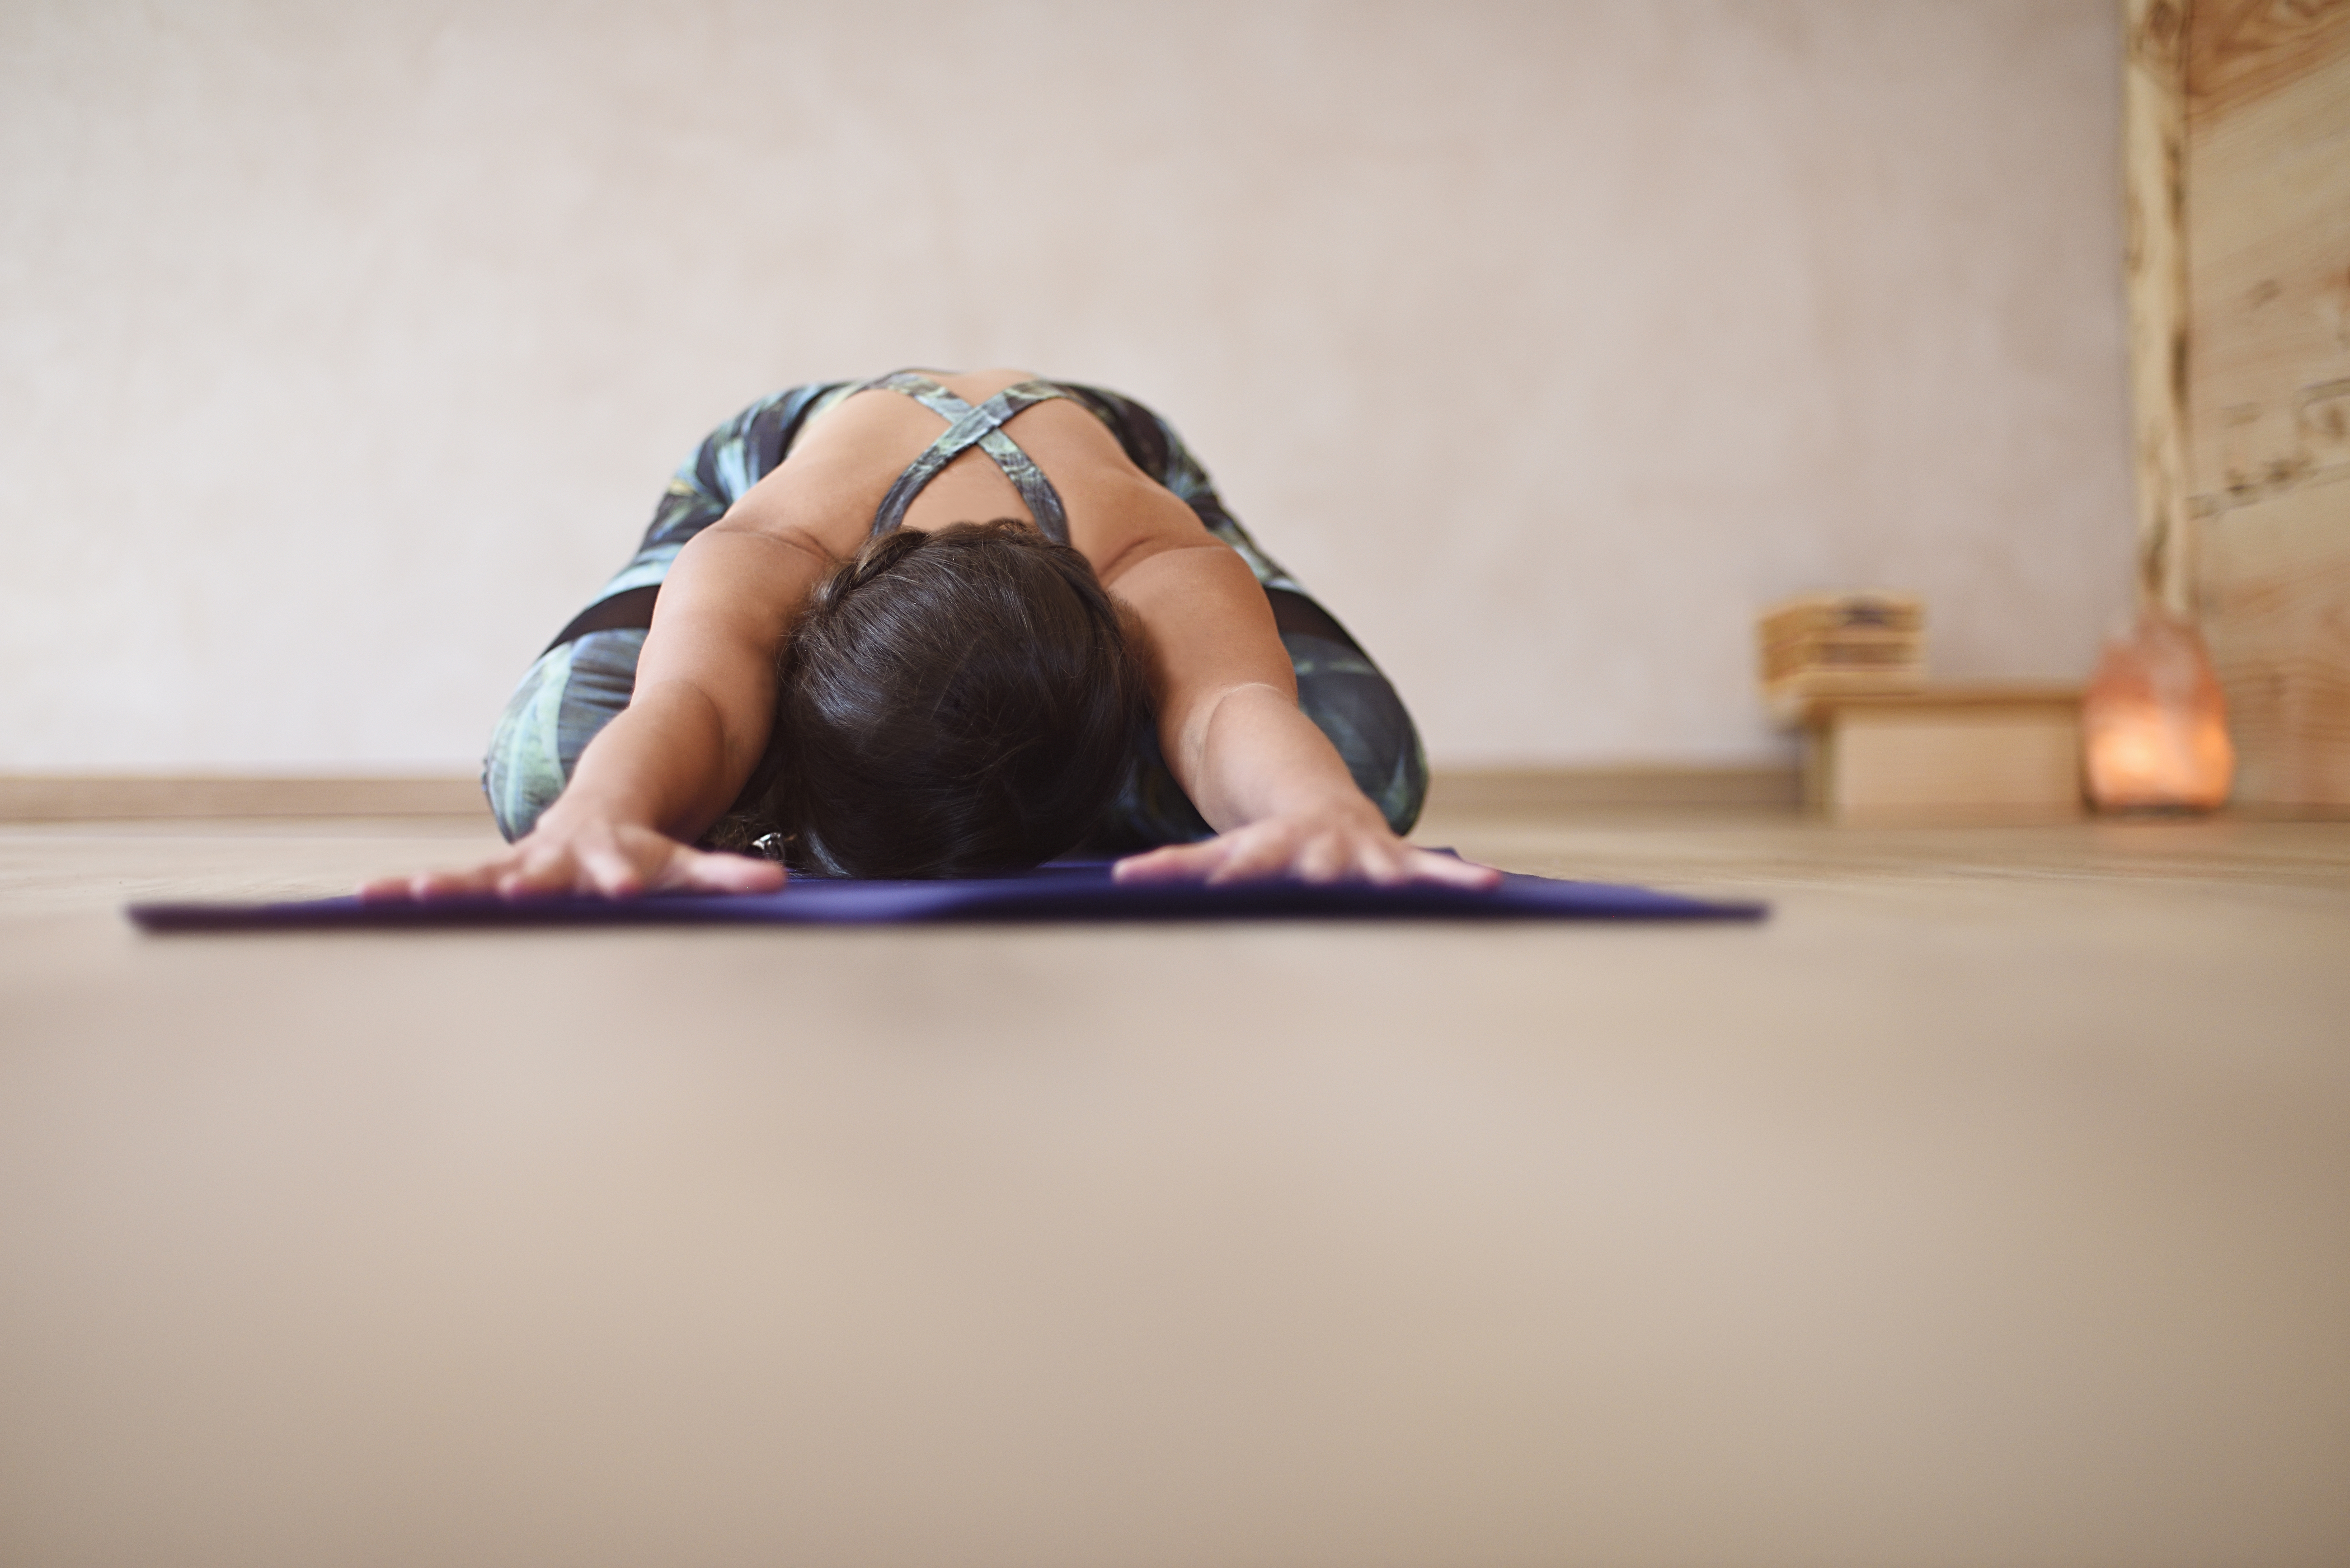 Suffering from low libido? Perform these five Yoga poses